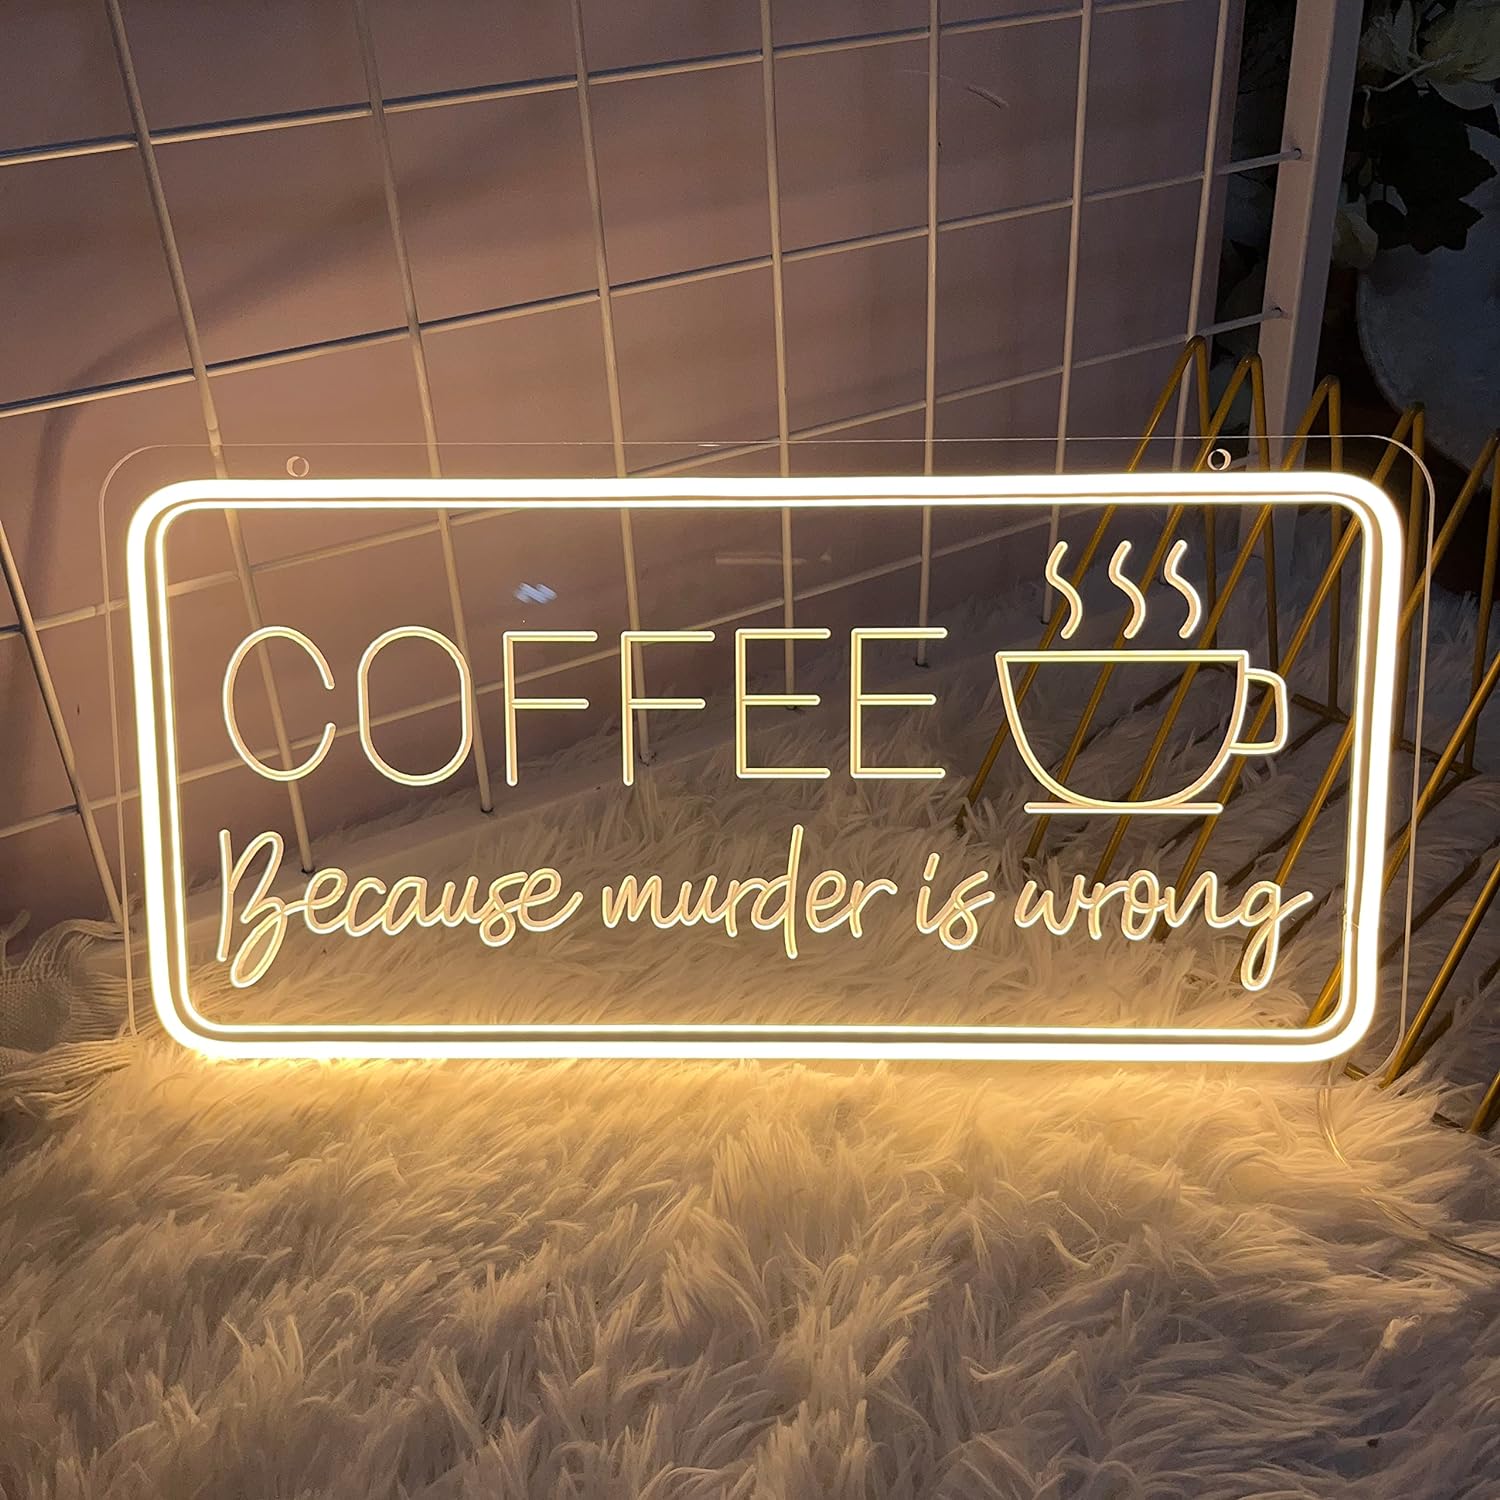 Coffee Neon Sign,LED Coffee Neon Signs for Wall Decor,Warm White USB Powered Coffee Sign for Wall Decor, Café, Restaurant,Coffee Barsn(15.7 * 7.8inch Neon）